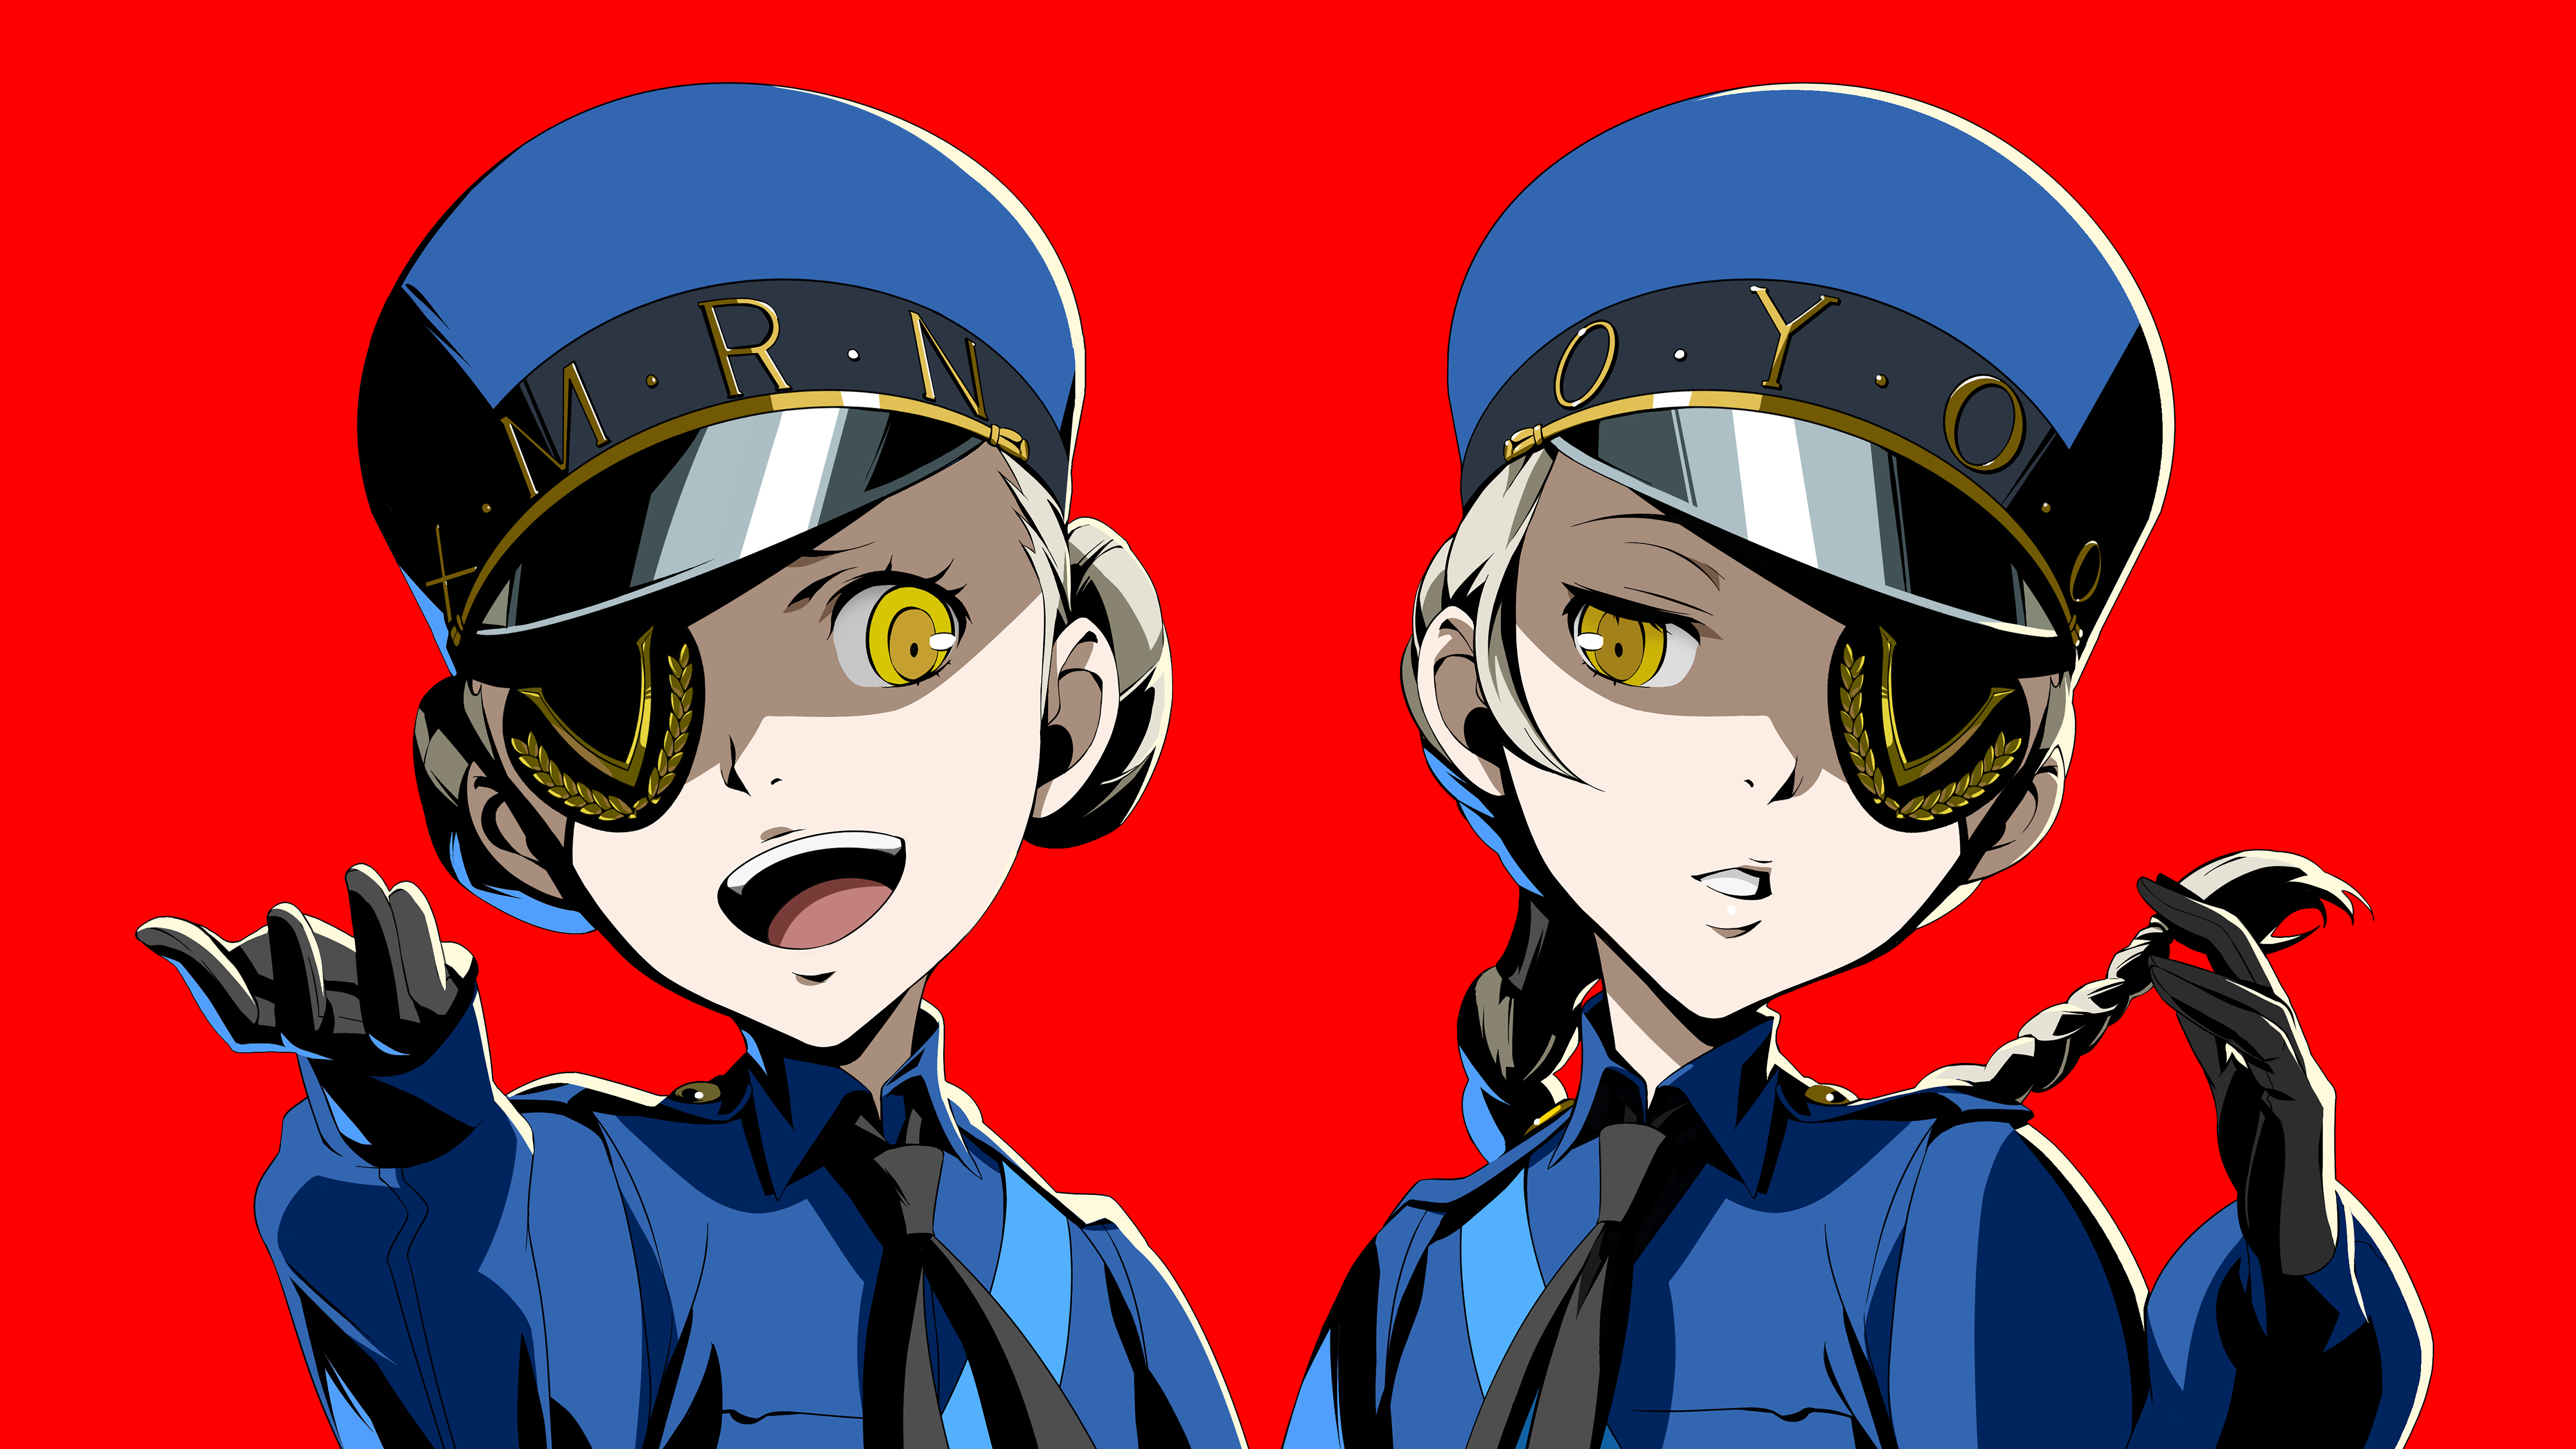 Anime 4552x2560 Persona 5 velvet room anime girls red background simple background hat eyepatches braids yellow eyes gloves uniform Persona series